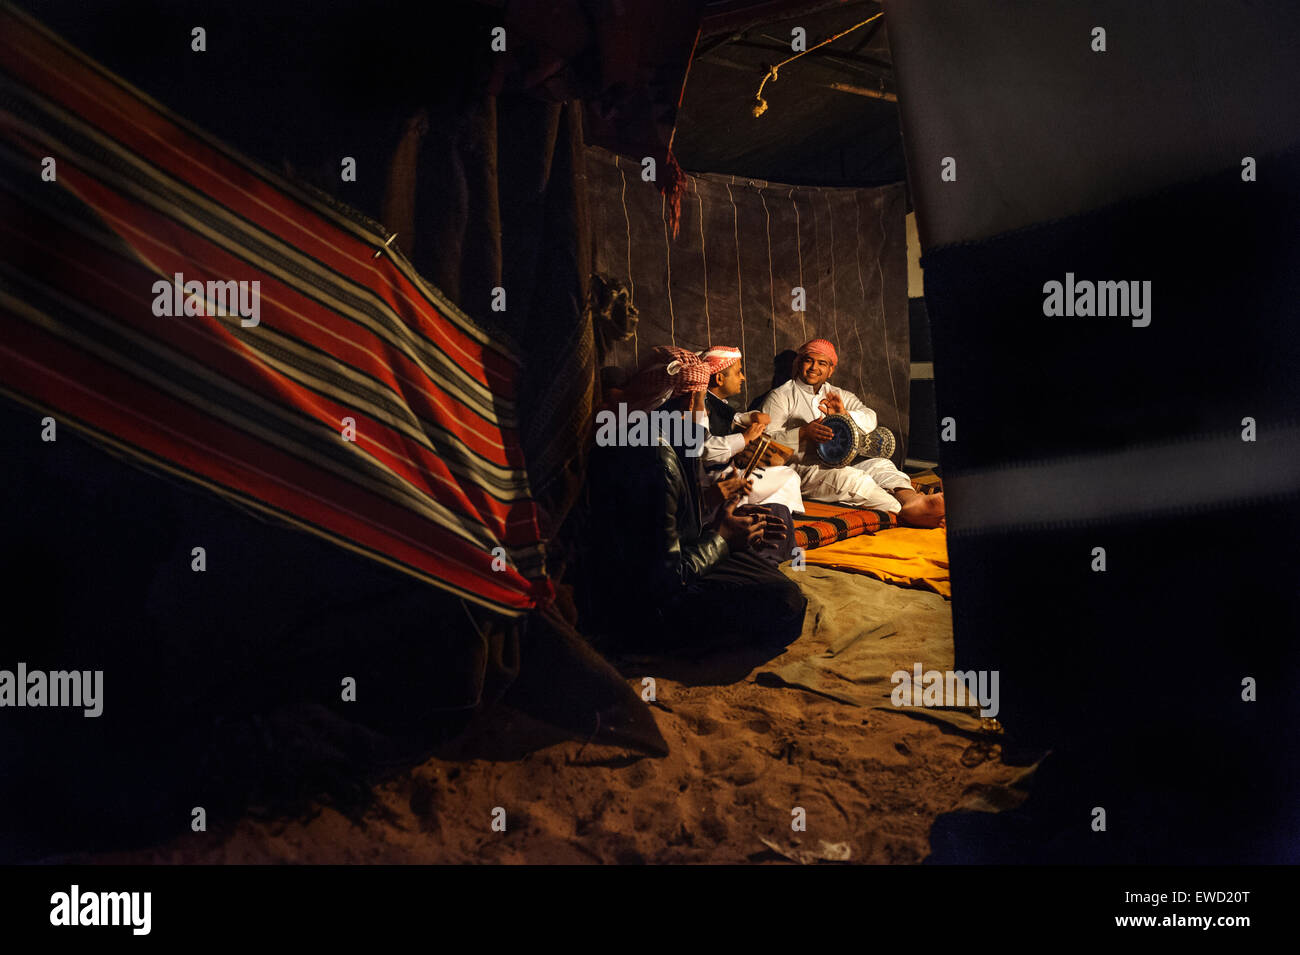 Local musicians playing in a Bedouin tent at night. Wadi Rum desert. Jordansights Stock Photo